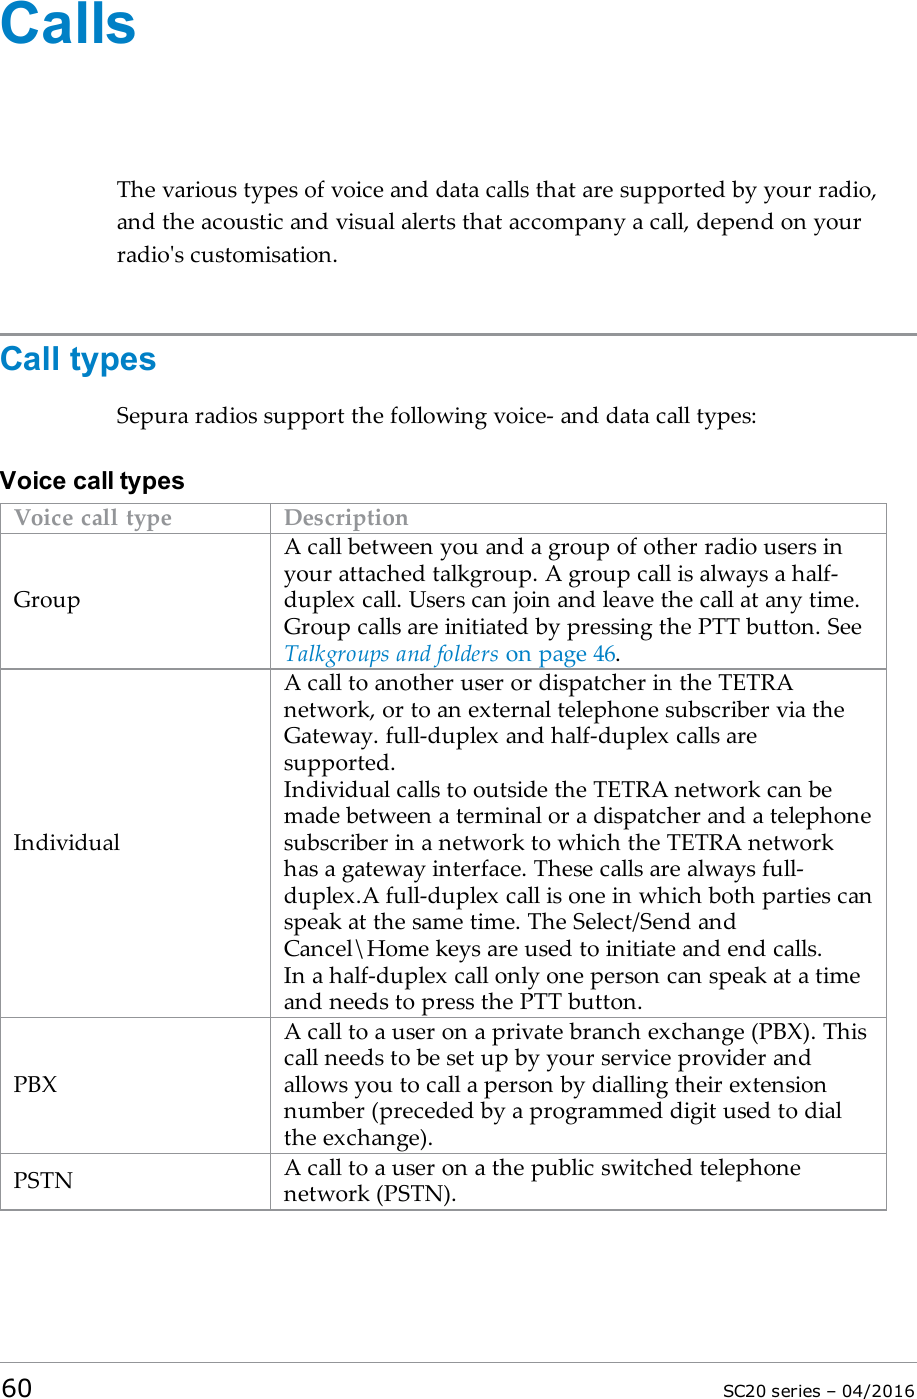 CallsThe various types of voice and data calls that are supported by your radio,and the acoustic and visual alerts that accompany a call, depend on yourradio&apos;s customisation.Call typesSepura radios support the following voice- and data call types:Voice call typesVoice call type DescriptionGroupA call between you and a group of other radio users inyour attached talkgroup. A group call is always a half-duplex call. Users can join and leave the call at any time.Group calls are initiated by pressing the PTT button. SeeTalkgroups and folders on page 46.IndividualA call to another user or dispatcher in the TETRAnetwork, or to an external telephone subscriber via theGateway. full-duplex and half-duplex calls aresupported.Individual calls to outside the TETRA network can bemade between a terminal or a dispatcher and a telephonesubscriber in a network to which the TETRA networkhas a gateway interface. These calls are always full-duplex.A full-duplex call is one in which both parties canspeak at the same time. The Select/Send andCancel\Home keys are used to initiate and end calls.In a half-duplex call only one person can speak at a timeand needs to press the PTT button.PBXA call to a user on a private branch exchange (PBX). Thiscall needs to be set up by your service provider andallows you to call a person by dialling their extensionnumber (preceded by a programmed digit used to dialthe exchange).PSTN A call to a user on a the public switched telephonenetwork (PSTN).60 SC20 series – 04/2016